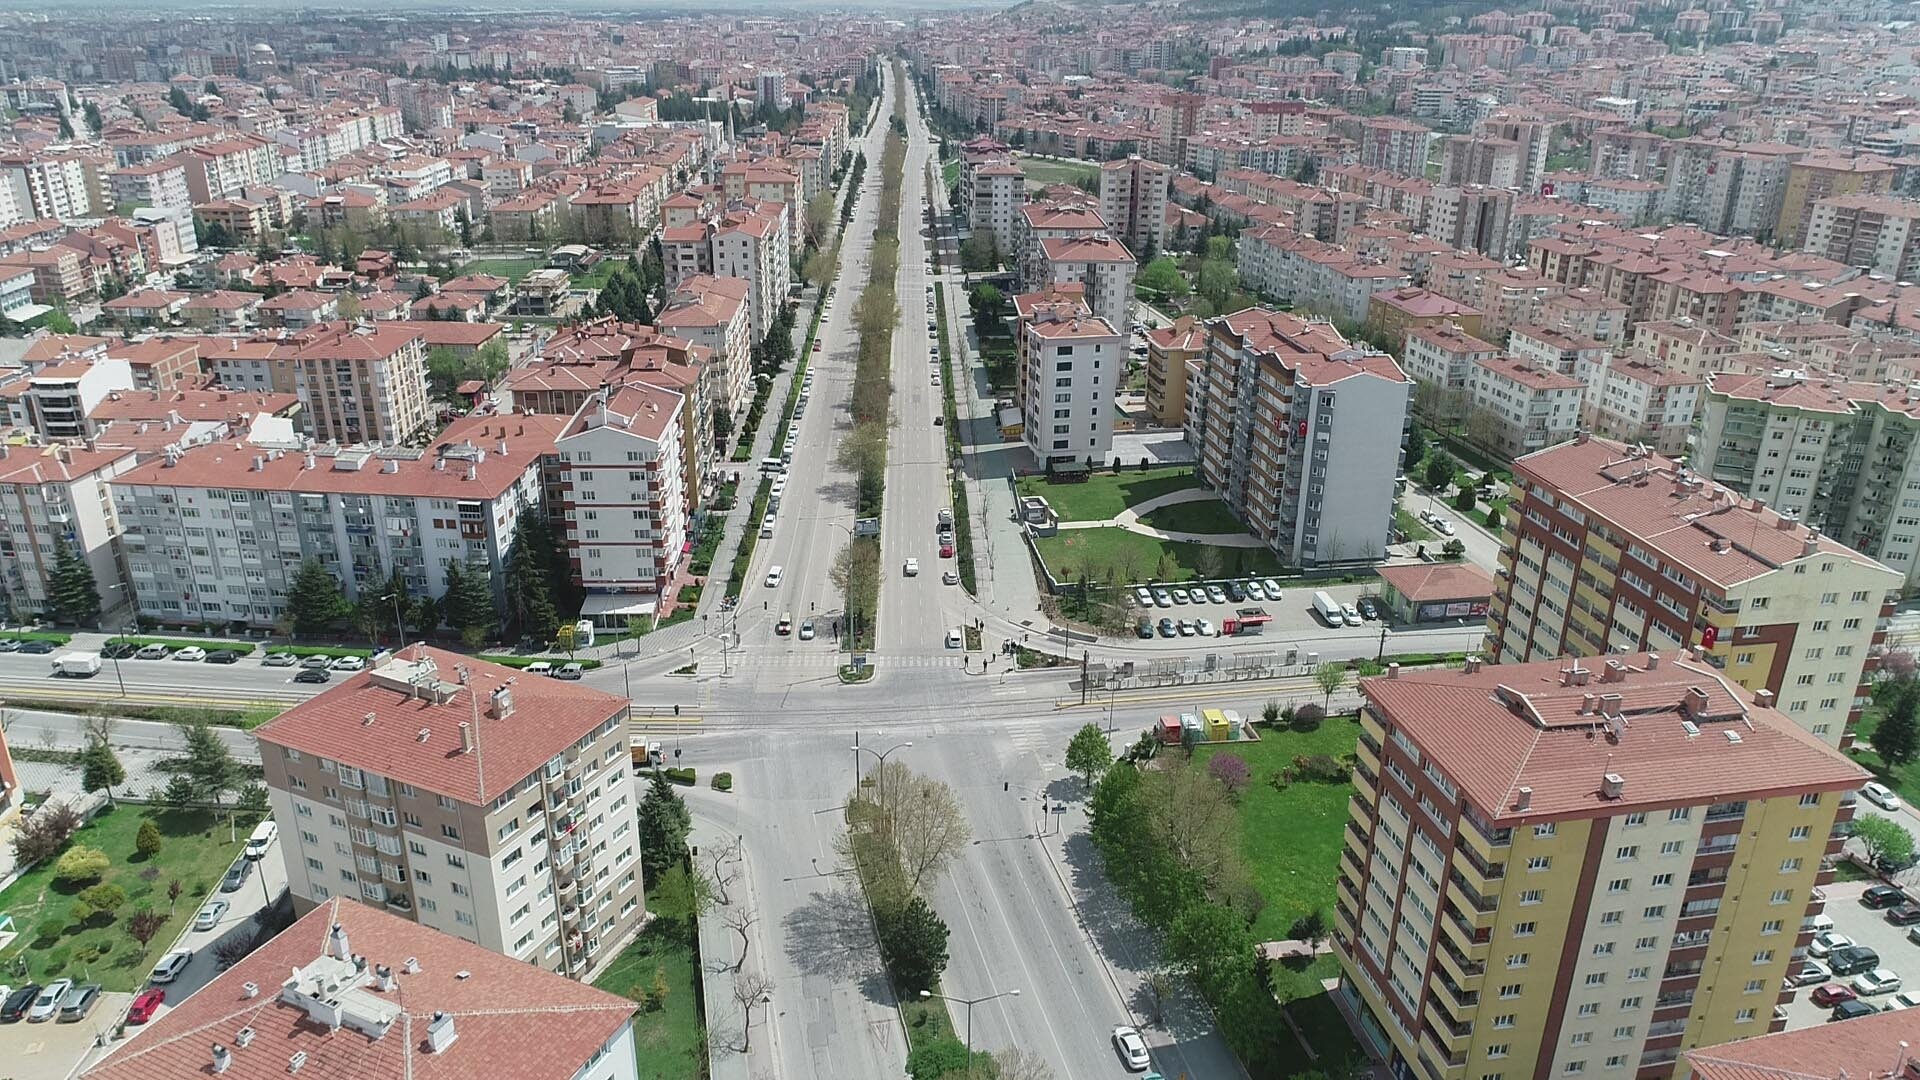 Remote learning deals blow to real estate agents in Turkey's university ...